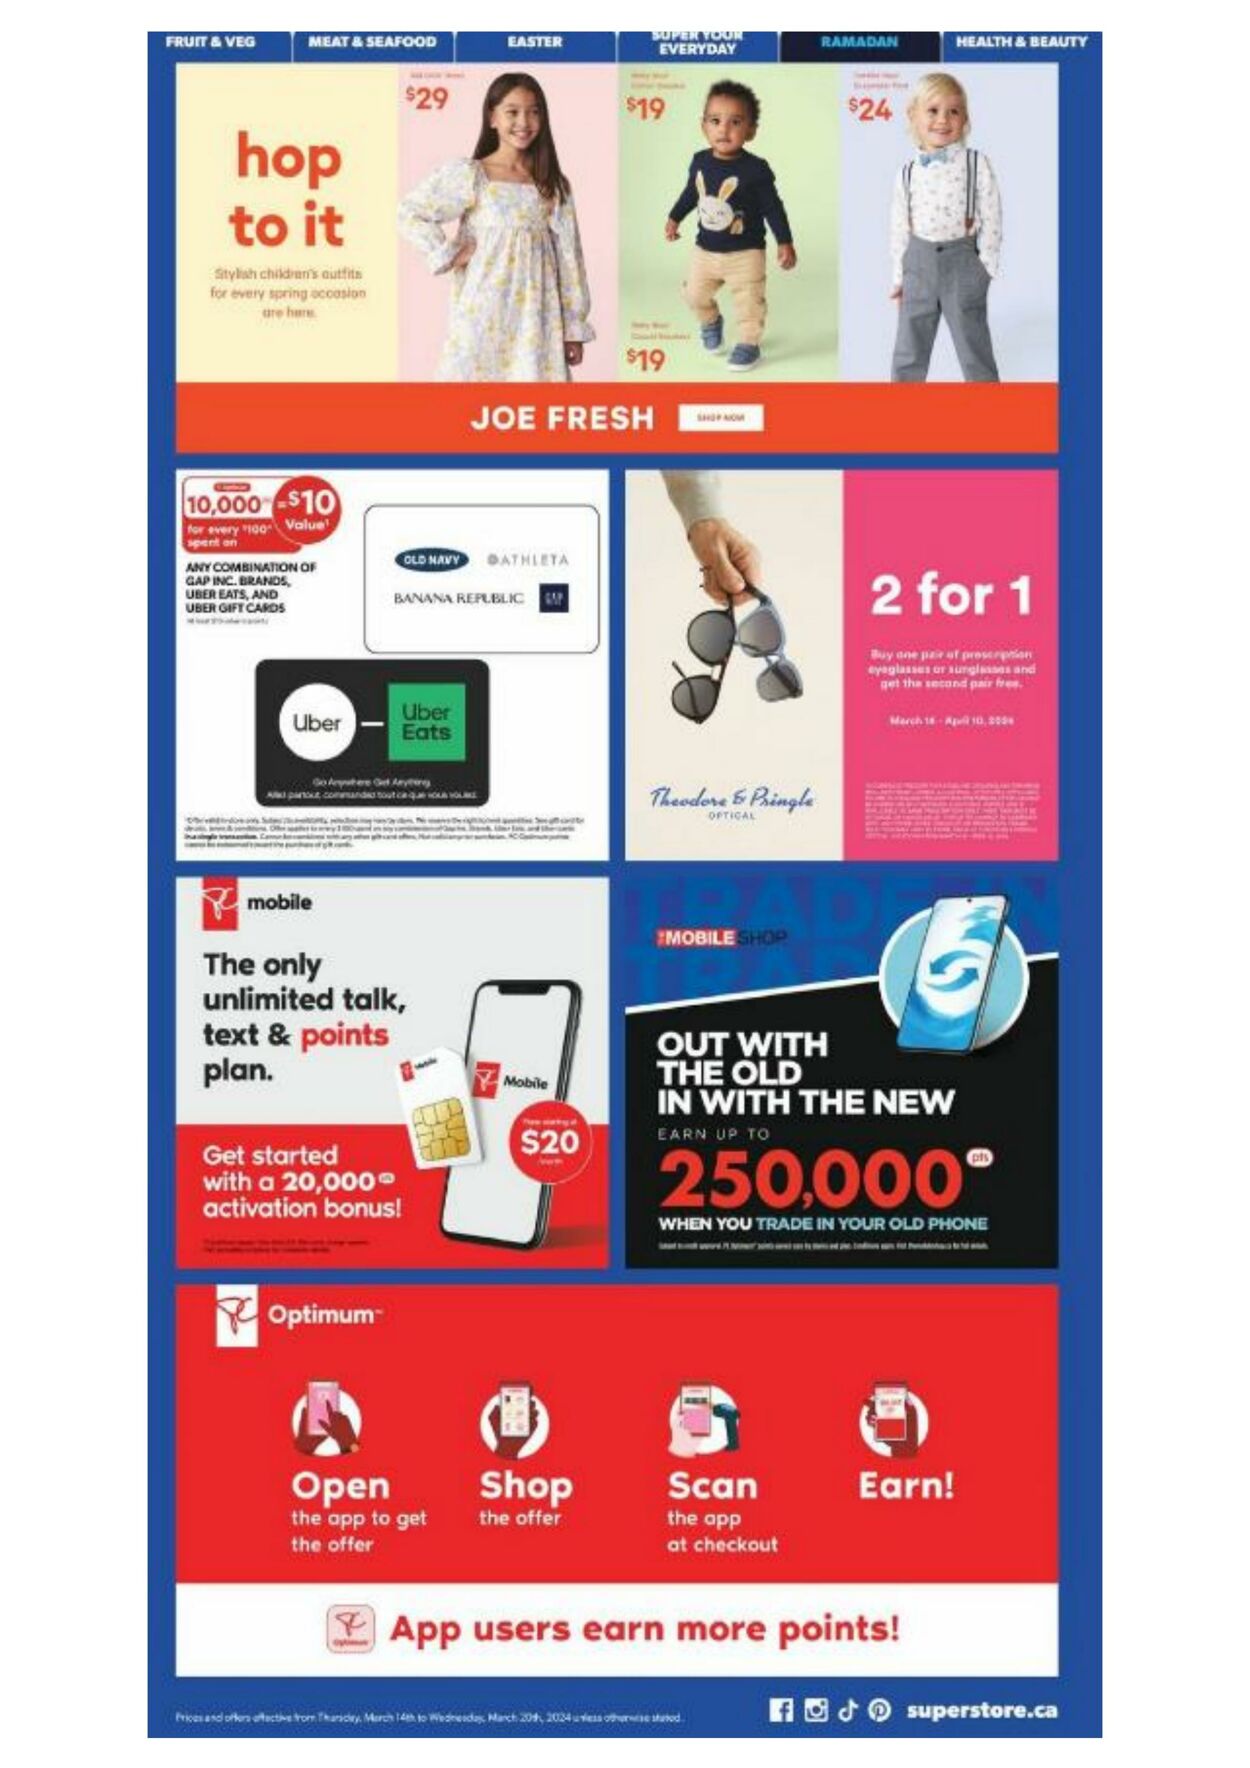 Flyer Real Canadian Superstore 14.03.2024 - 20.03.2024